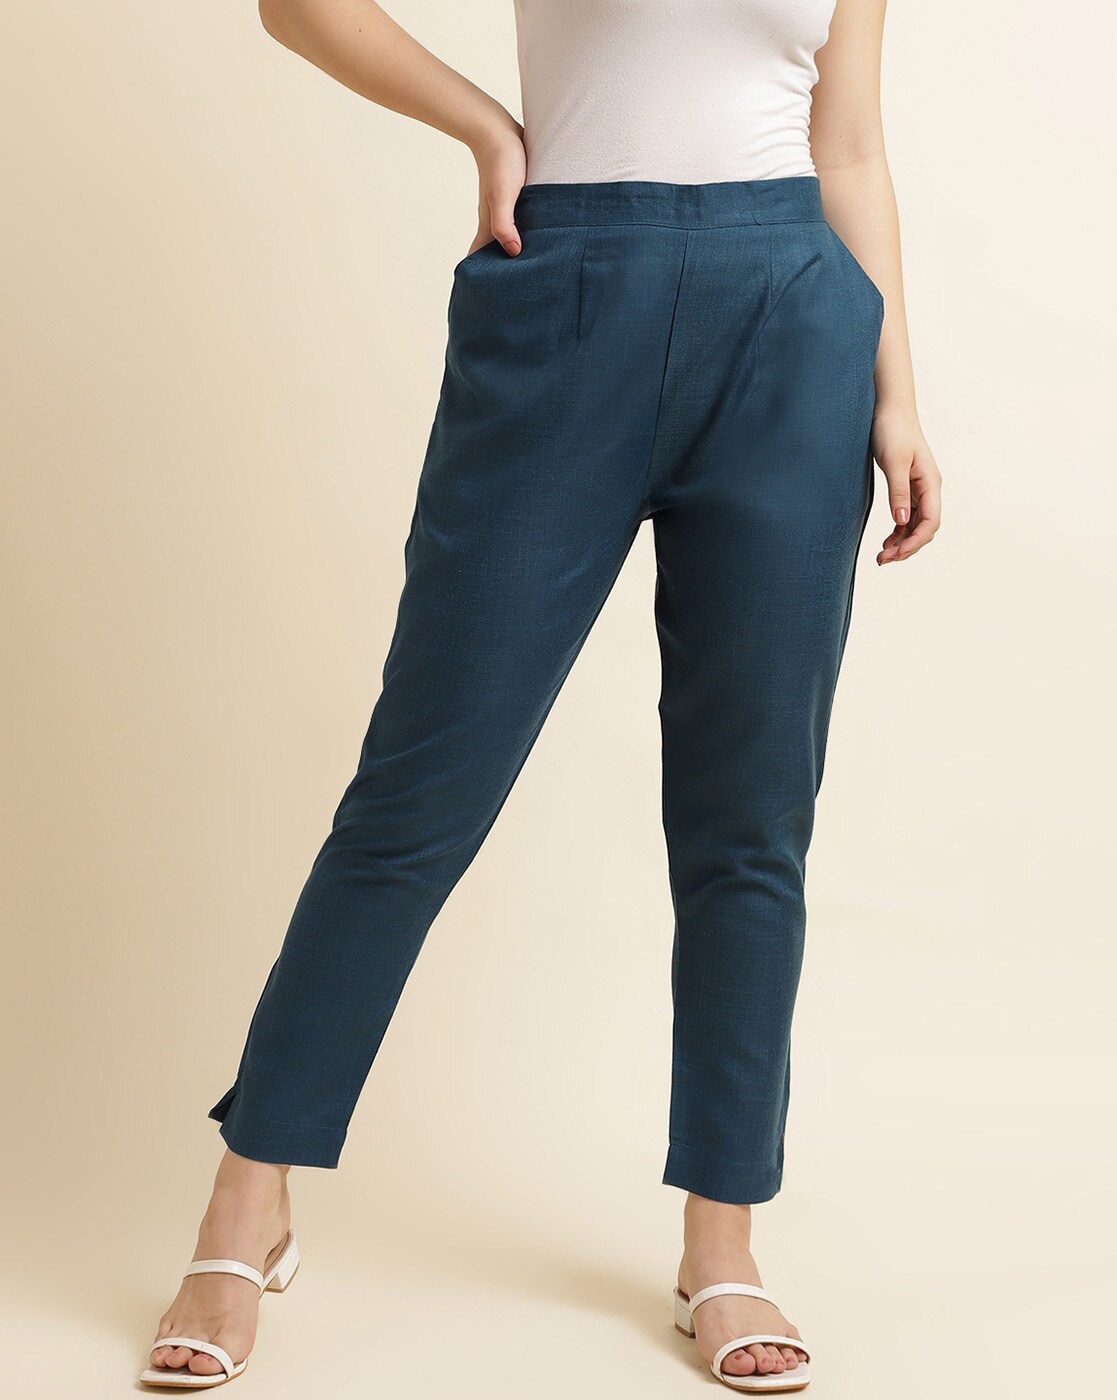 Buy Teal Trousers & Pants for Women by FABCLUB Online